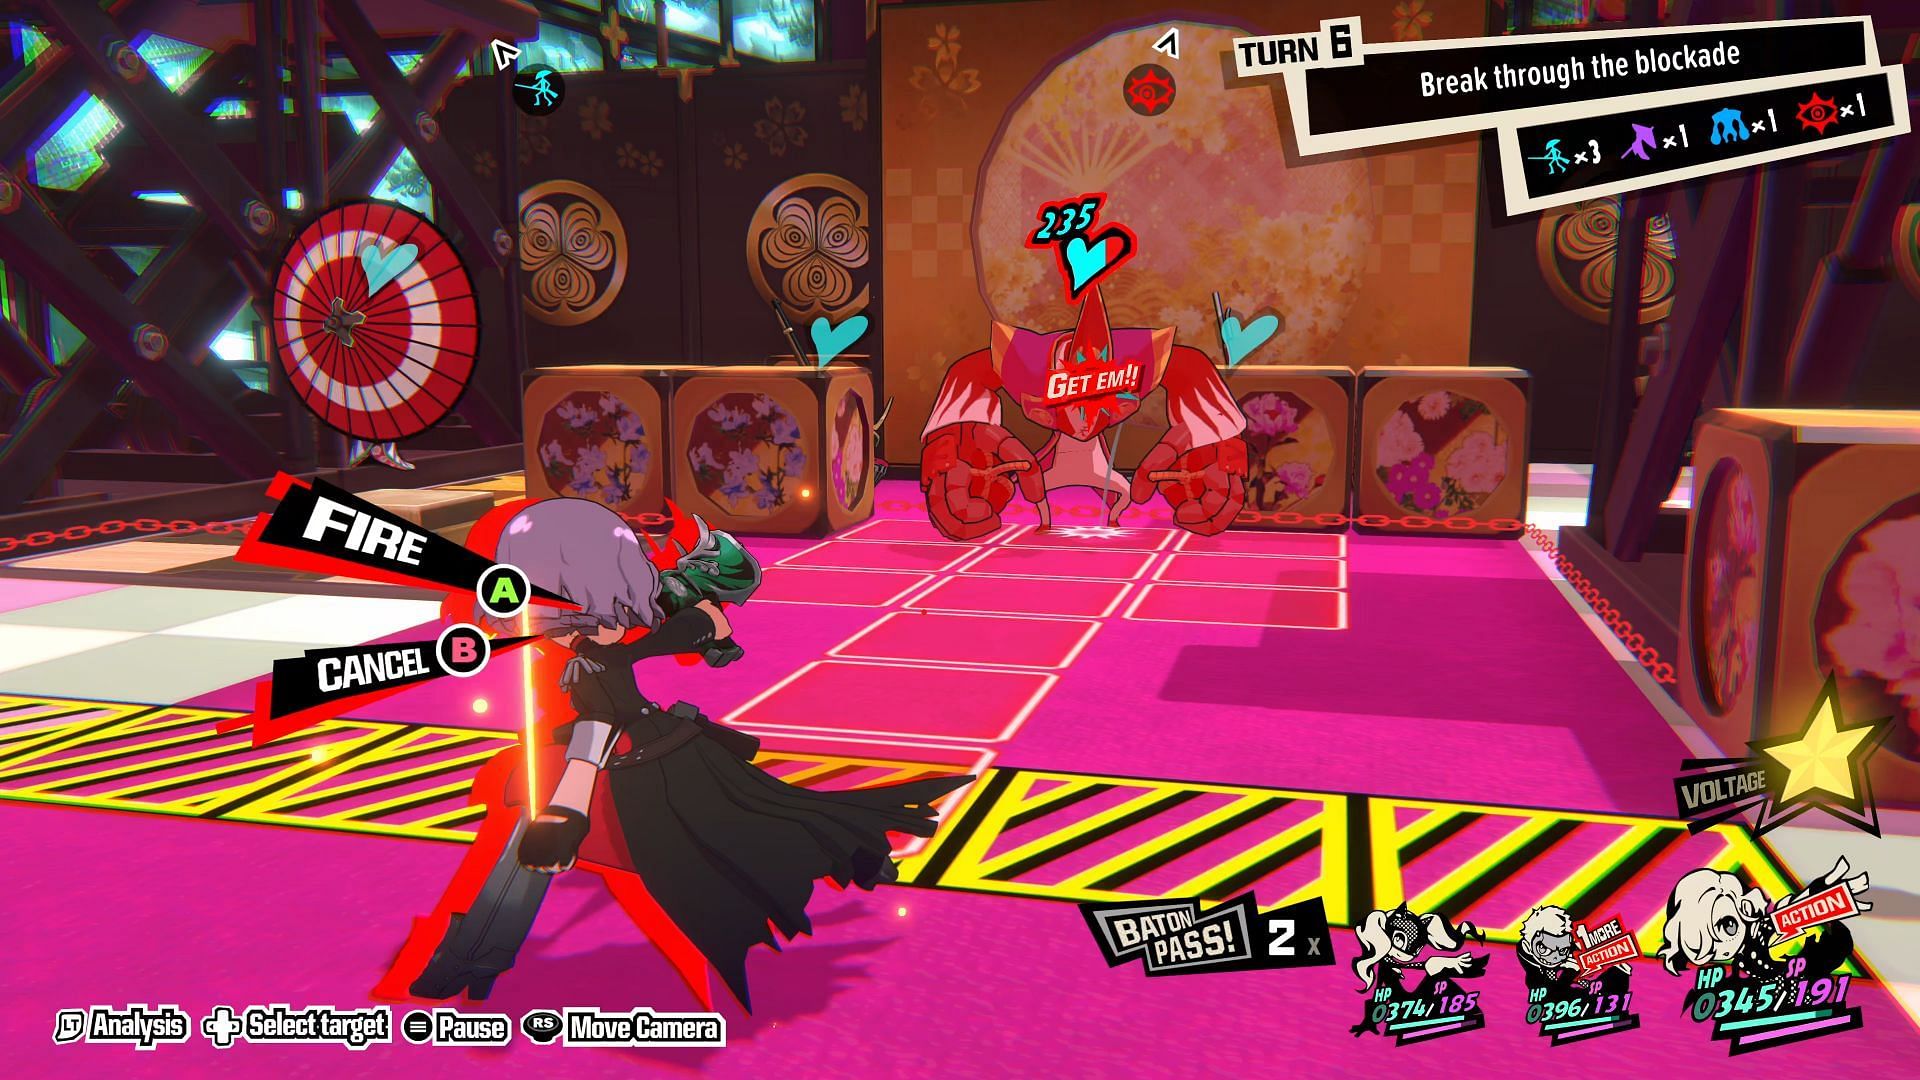 Exploit enemy weakness to get One More (Image via Persona 5 Tactica)